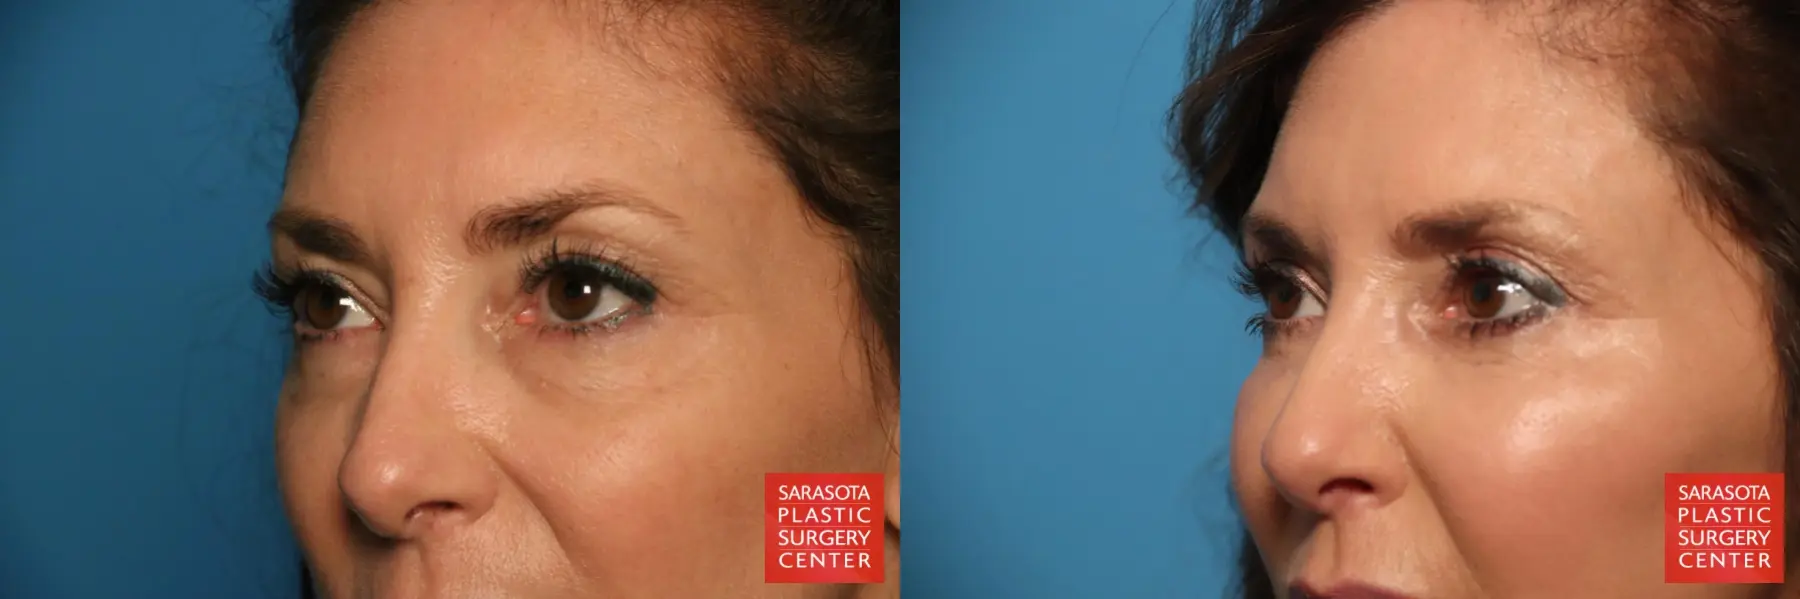 Eyelid Surgery: Patient 6 - Before and After 4